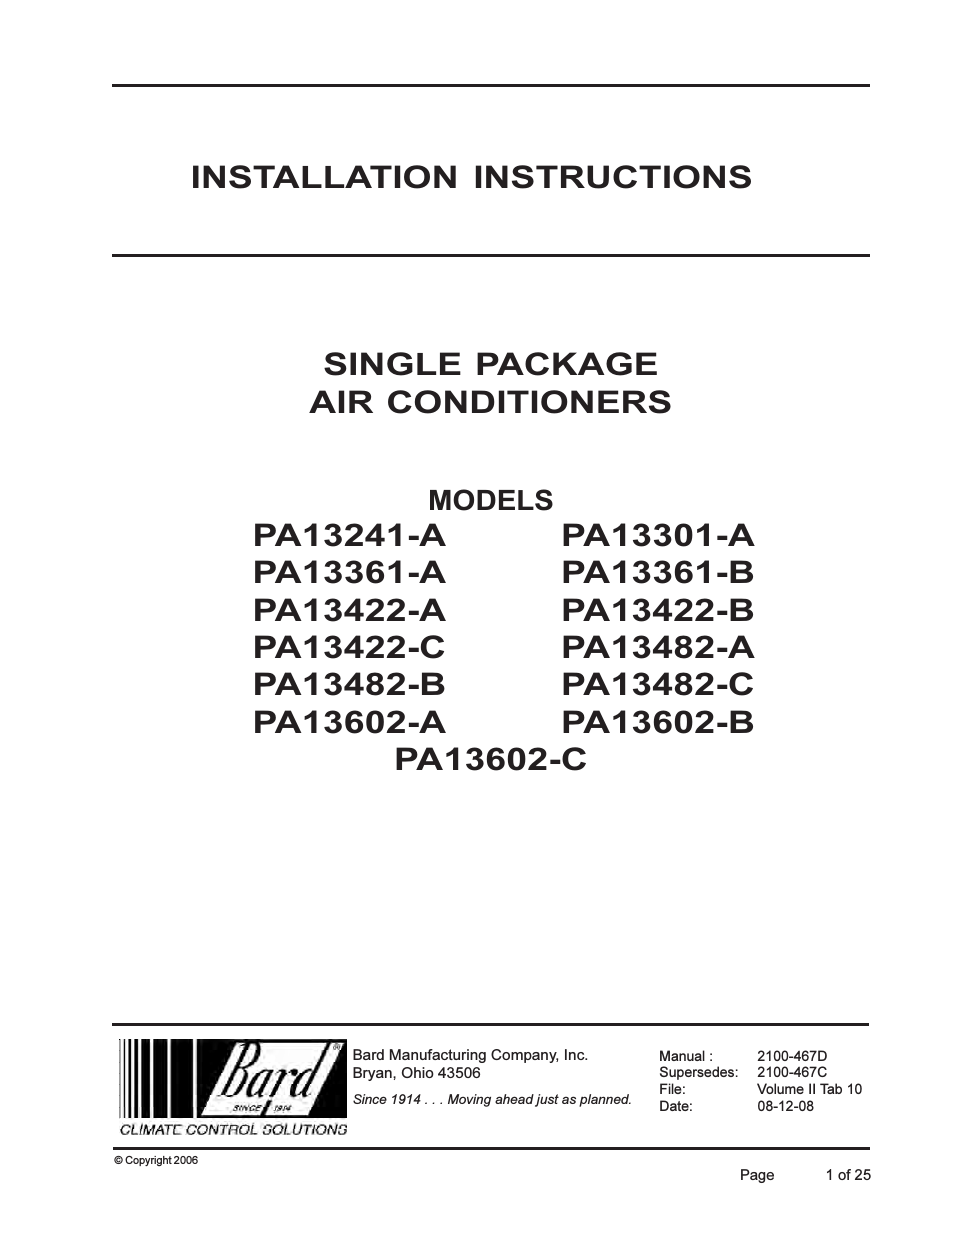 Single Package Air Conditioners PA13422-C